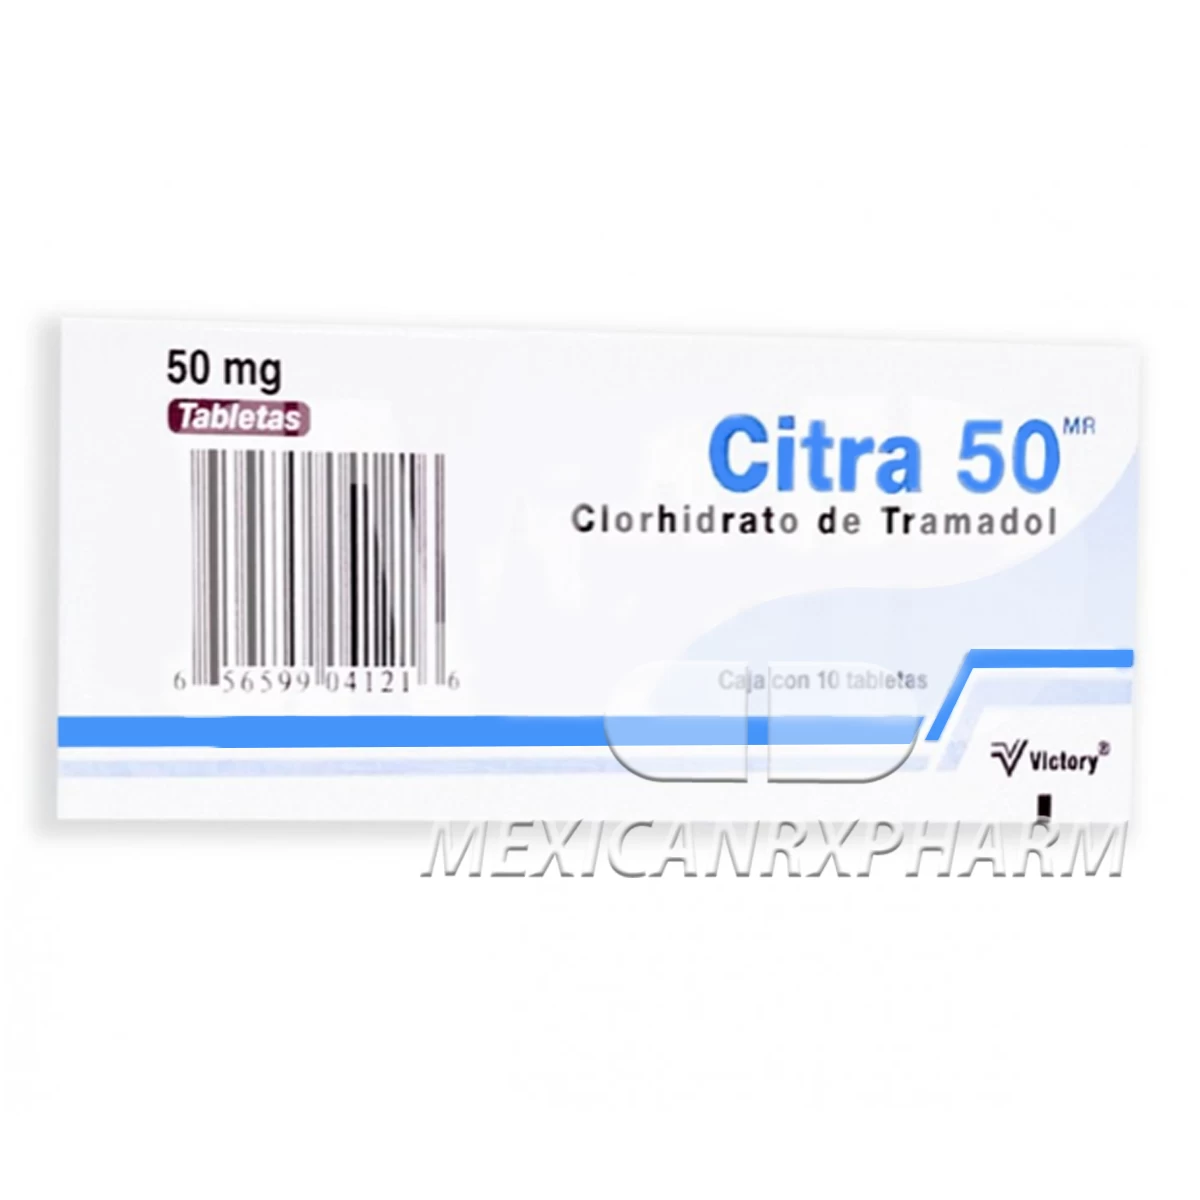 Buy Citra Tramadol Adiolol Generic 50mg 10, 30 and 50 Caps For Sale Online at Cheap Rates